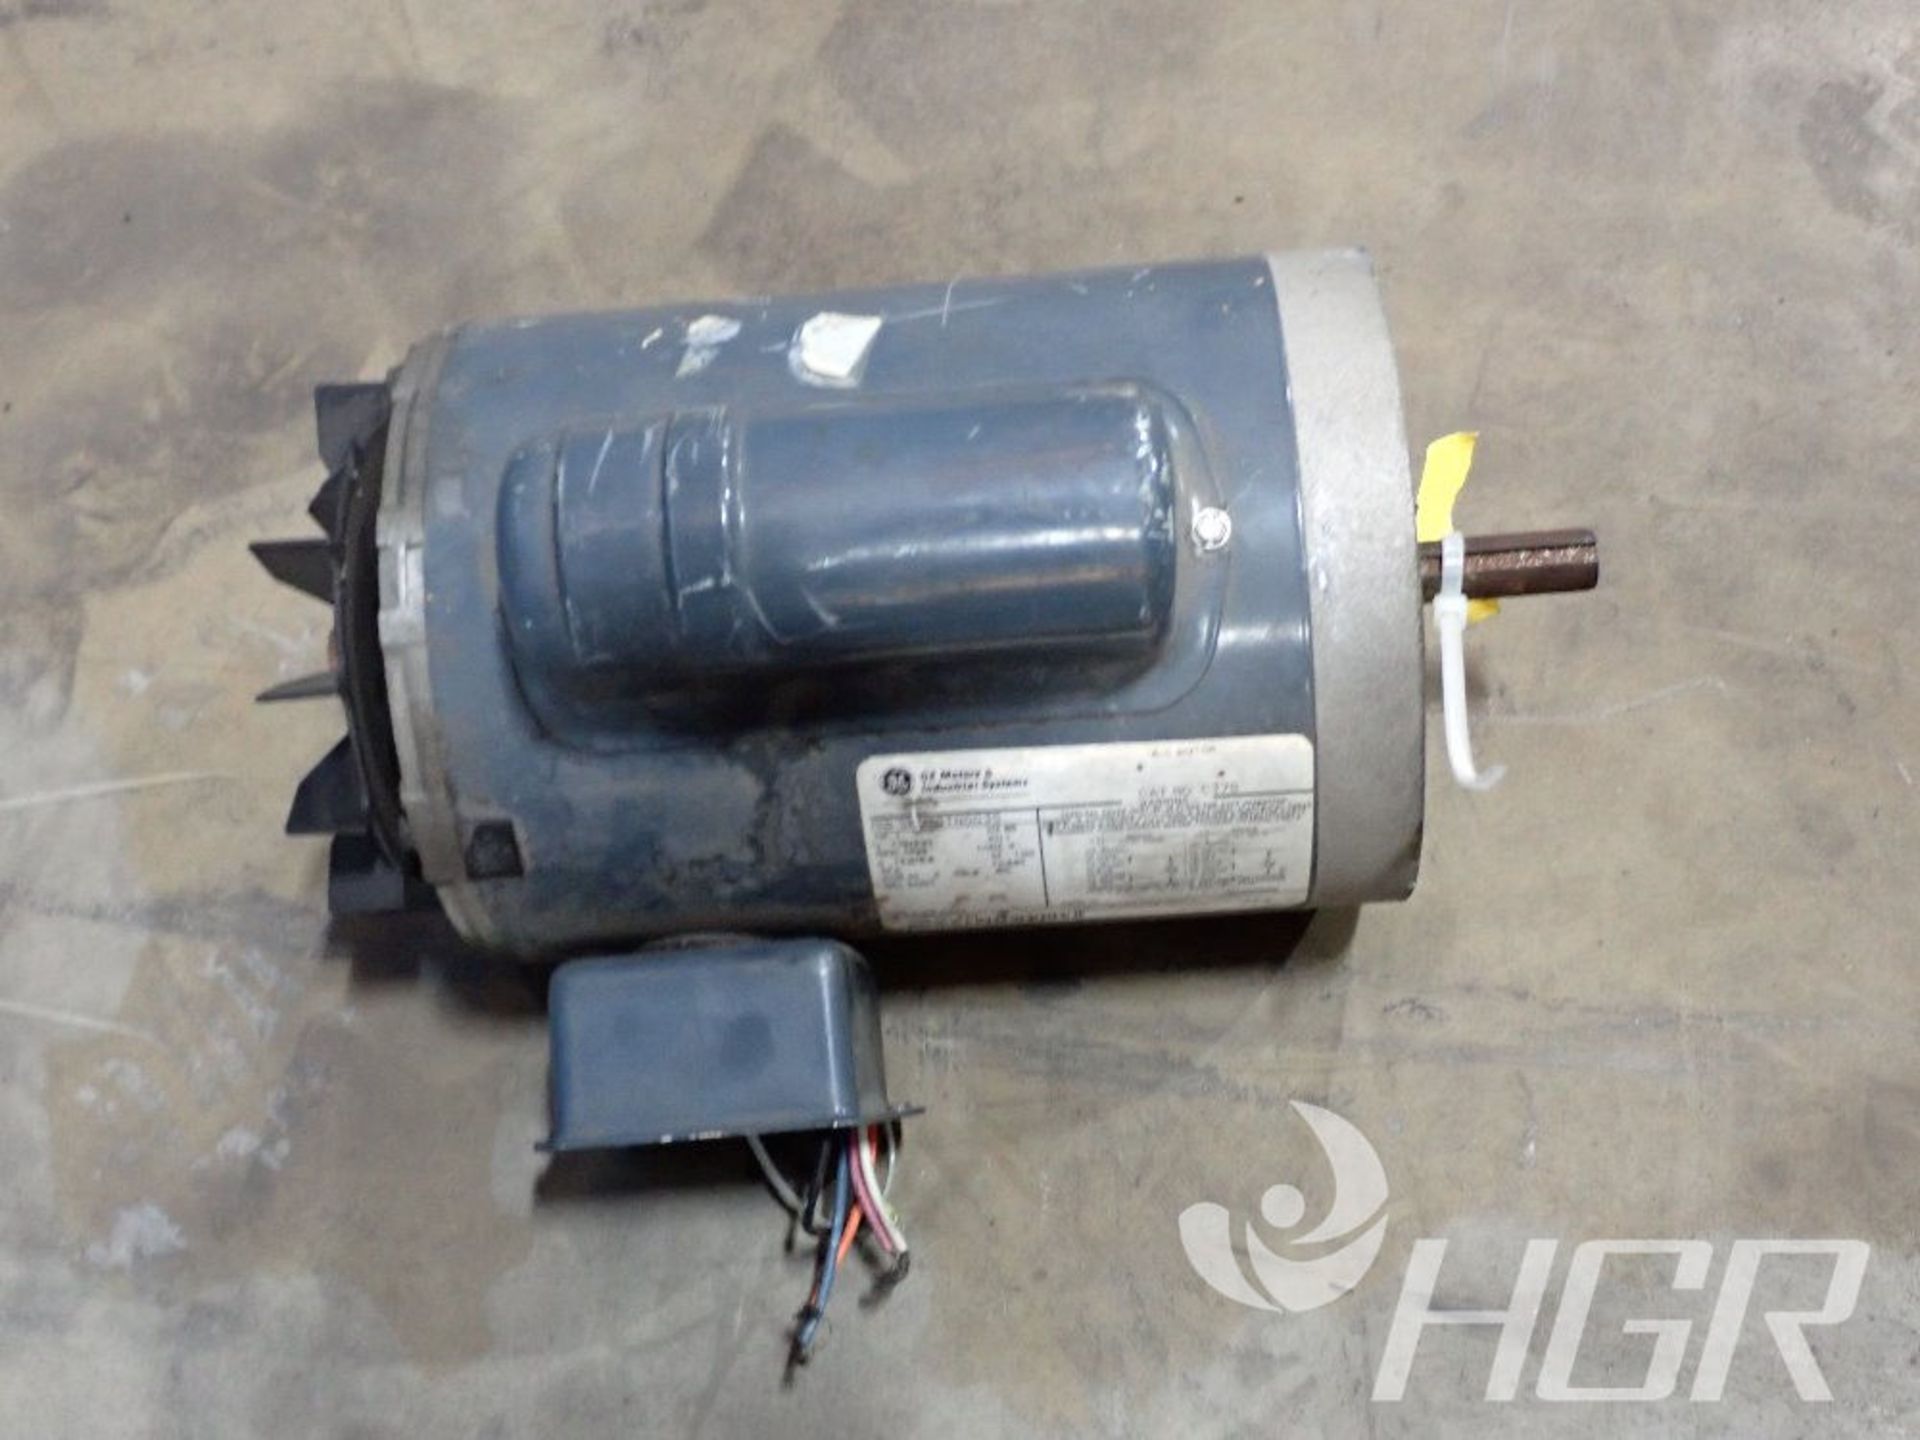 GE MOTOR, Model 5K949TN0035, Date: n/a; s/n n/a, Approx. Capacity: 1HP, Power: 1/60/115/230, - Image 3 of 6